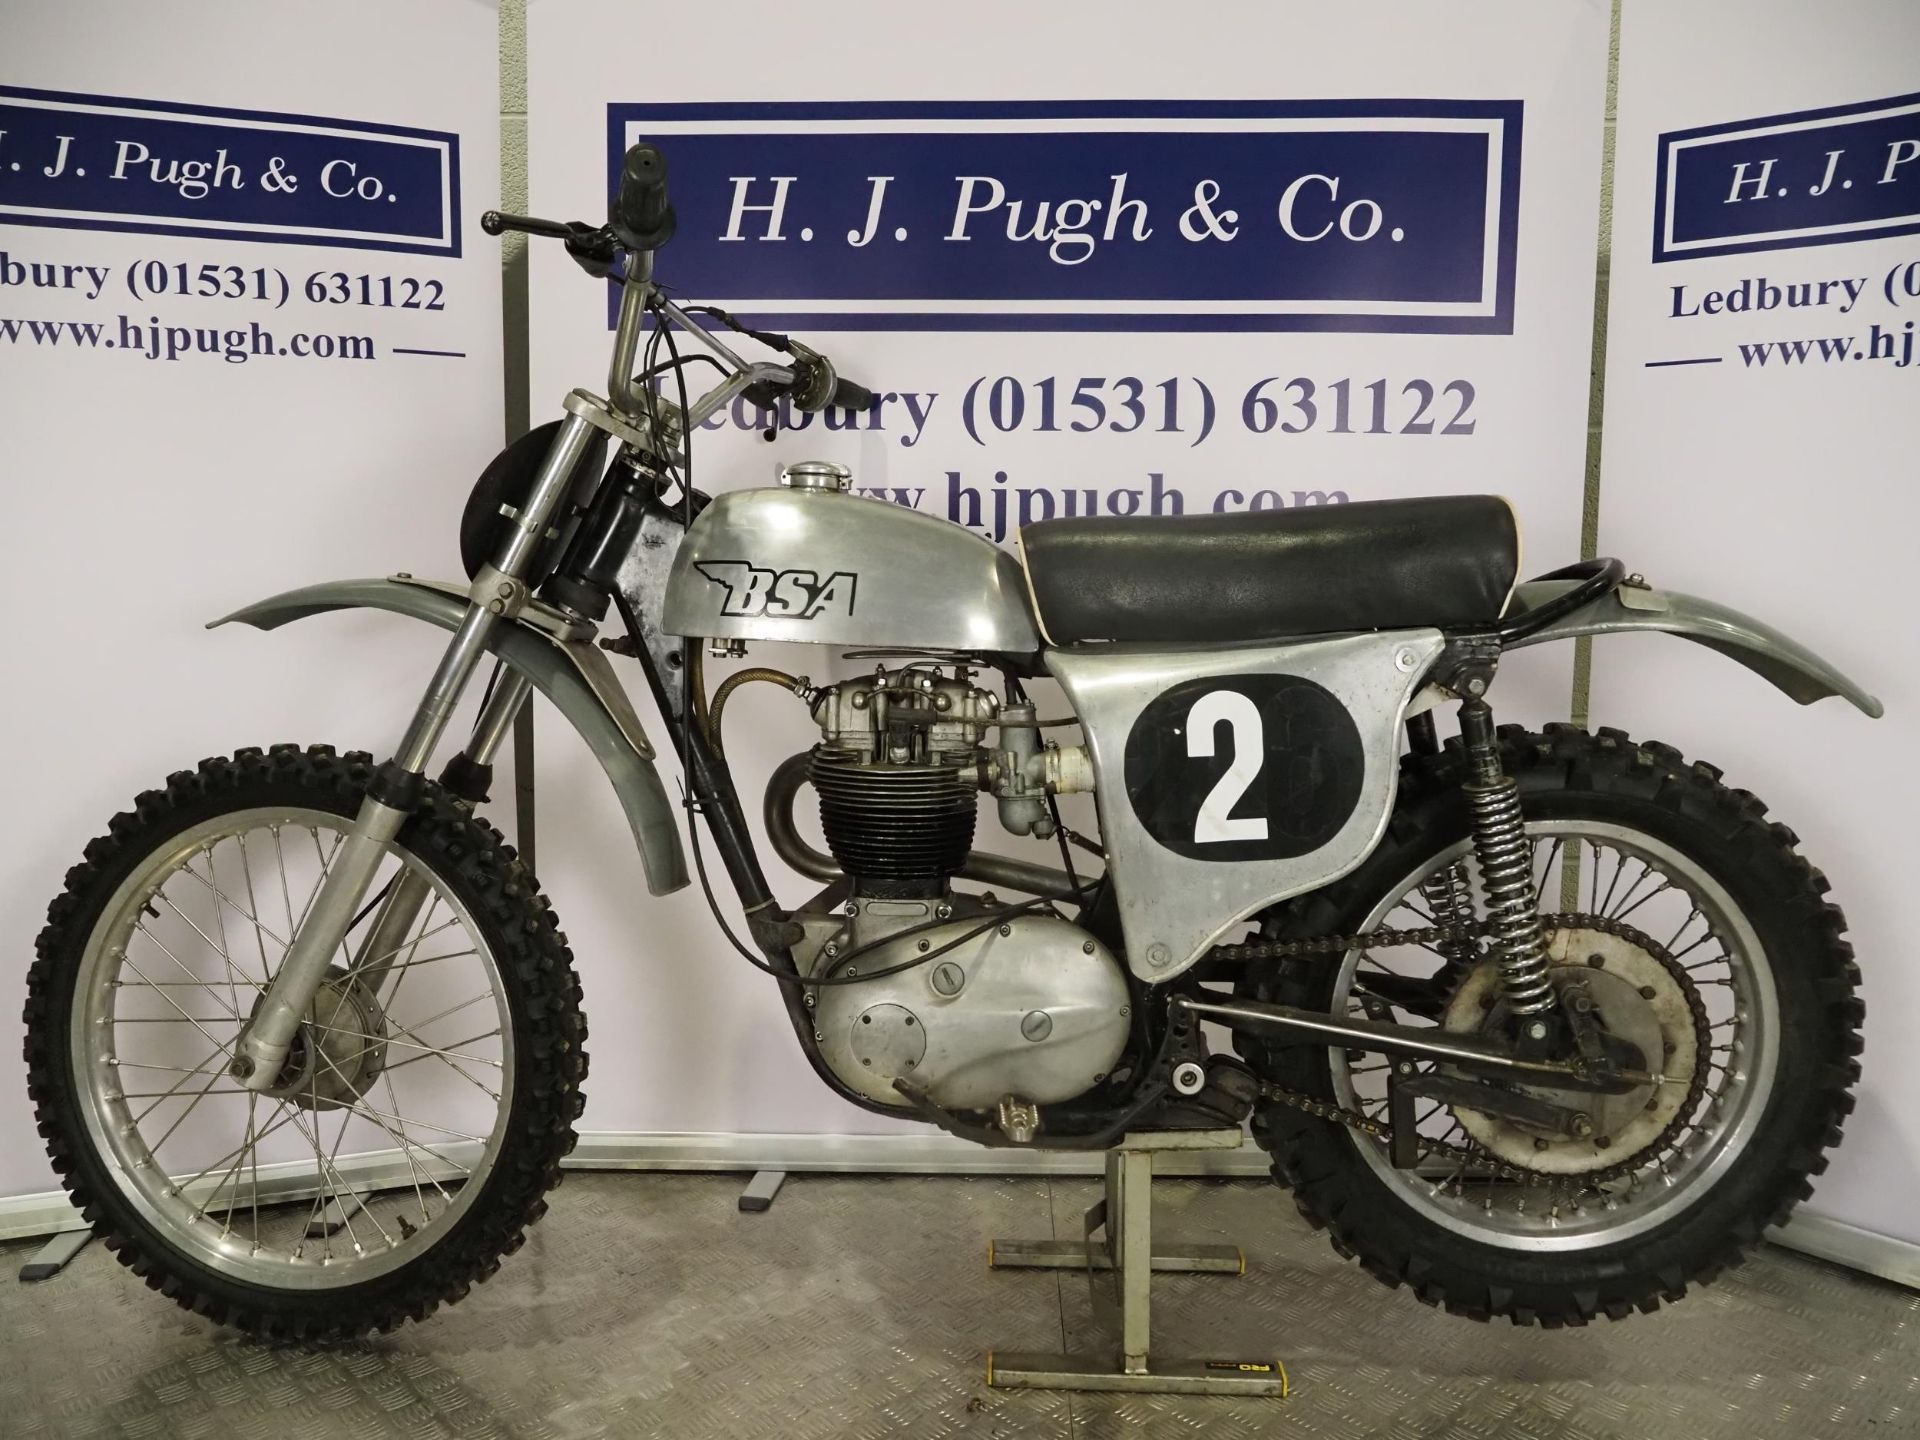 BSA Walker Victor trials motorcycle. 441cc Engine turns over. Has been dry stored for many years. - Image 7 of 7